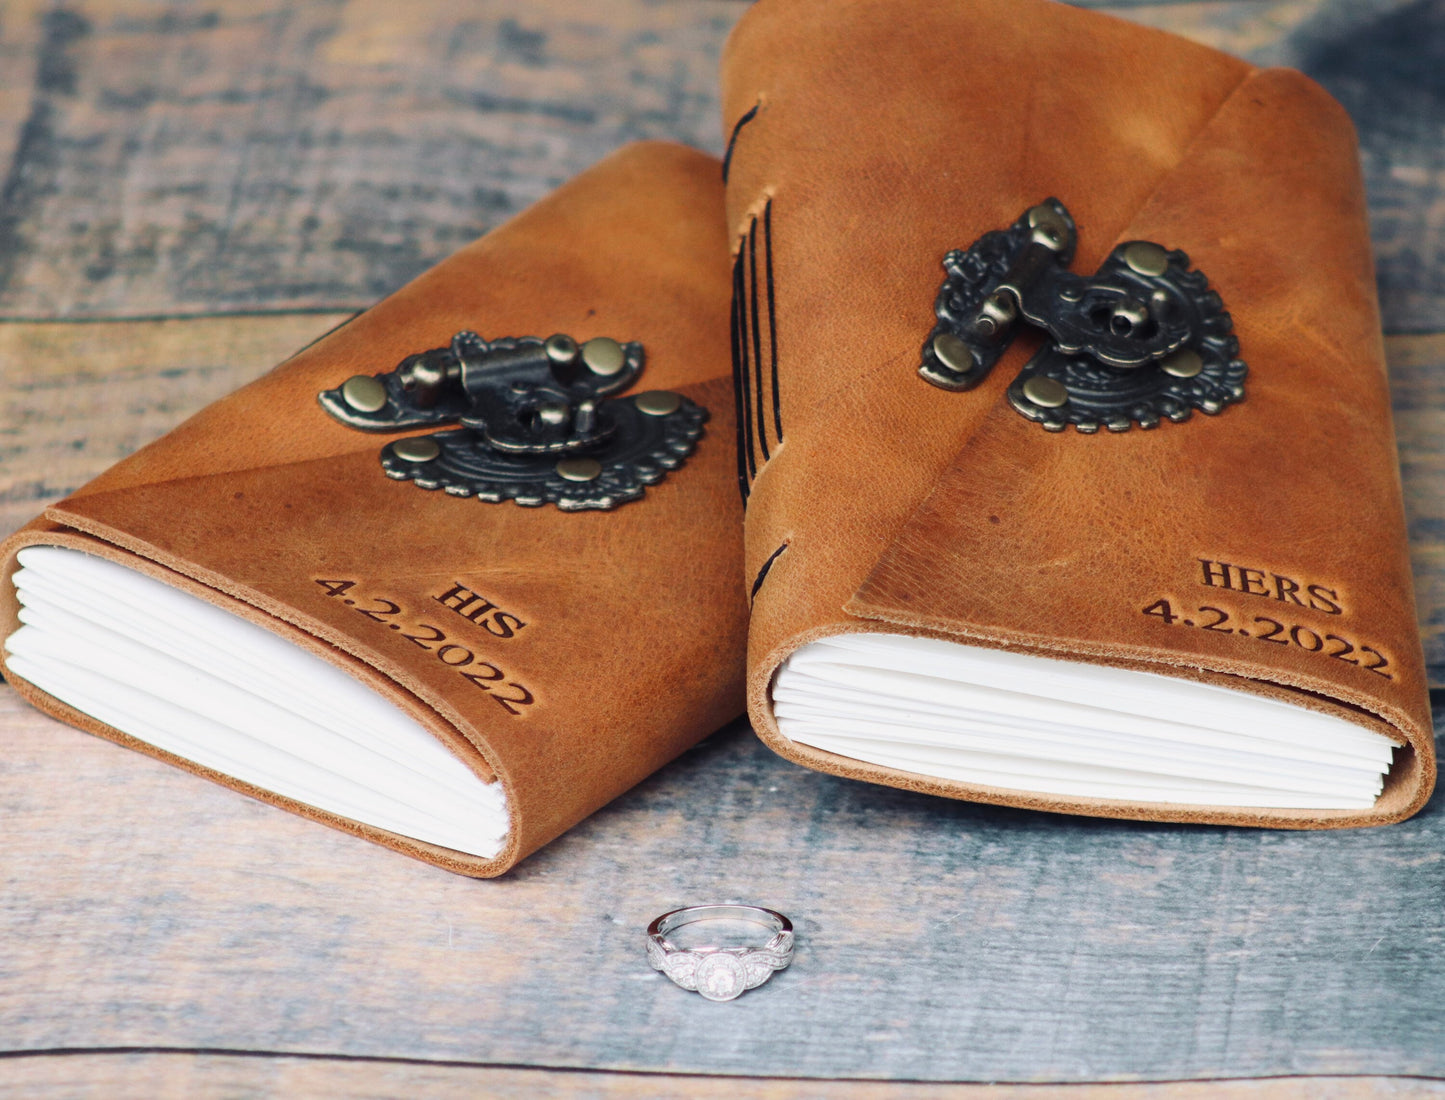 VOWS BOOKS 2.0! Set of Personalized Wedding Vows Books, Premium Leather Bound Journals for Bride & Groom, Rustic Wedding Gift